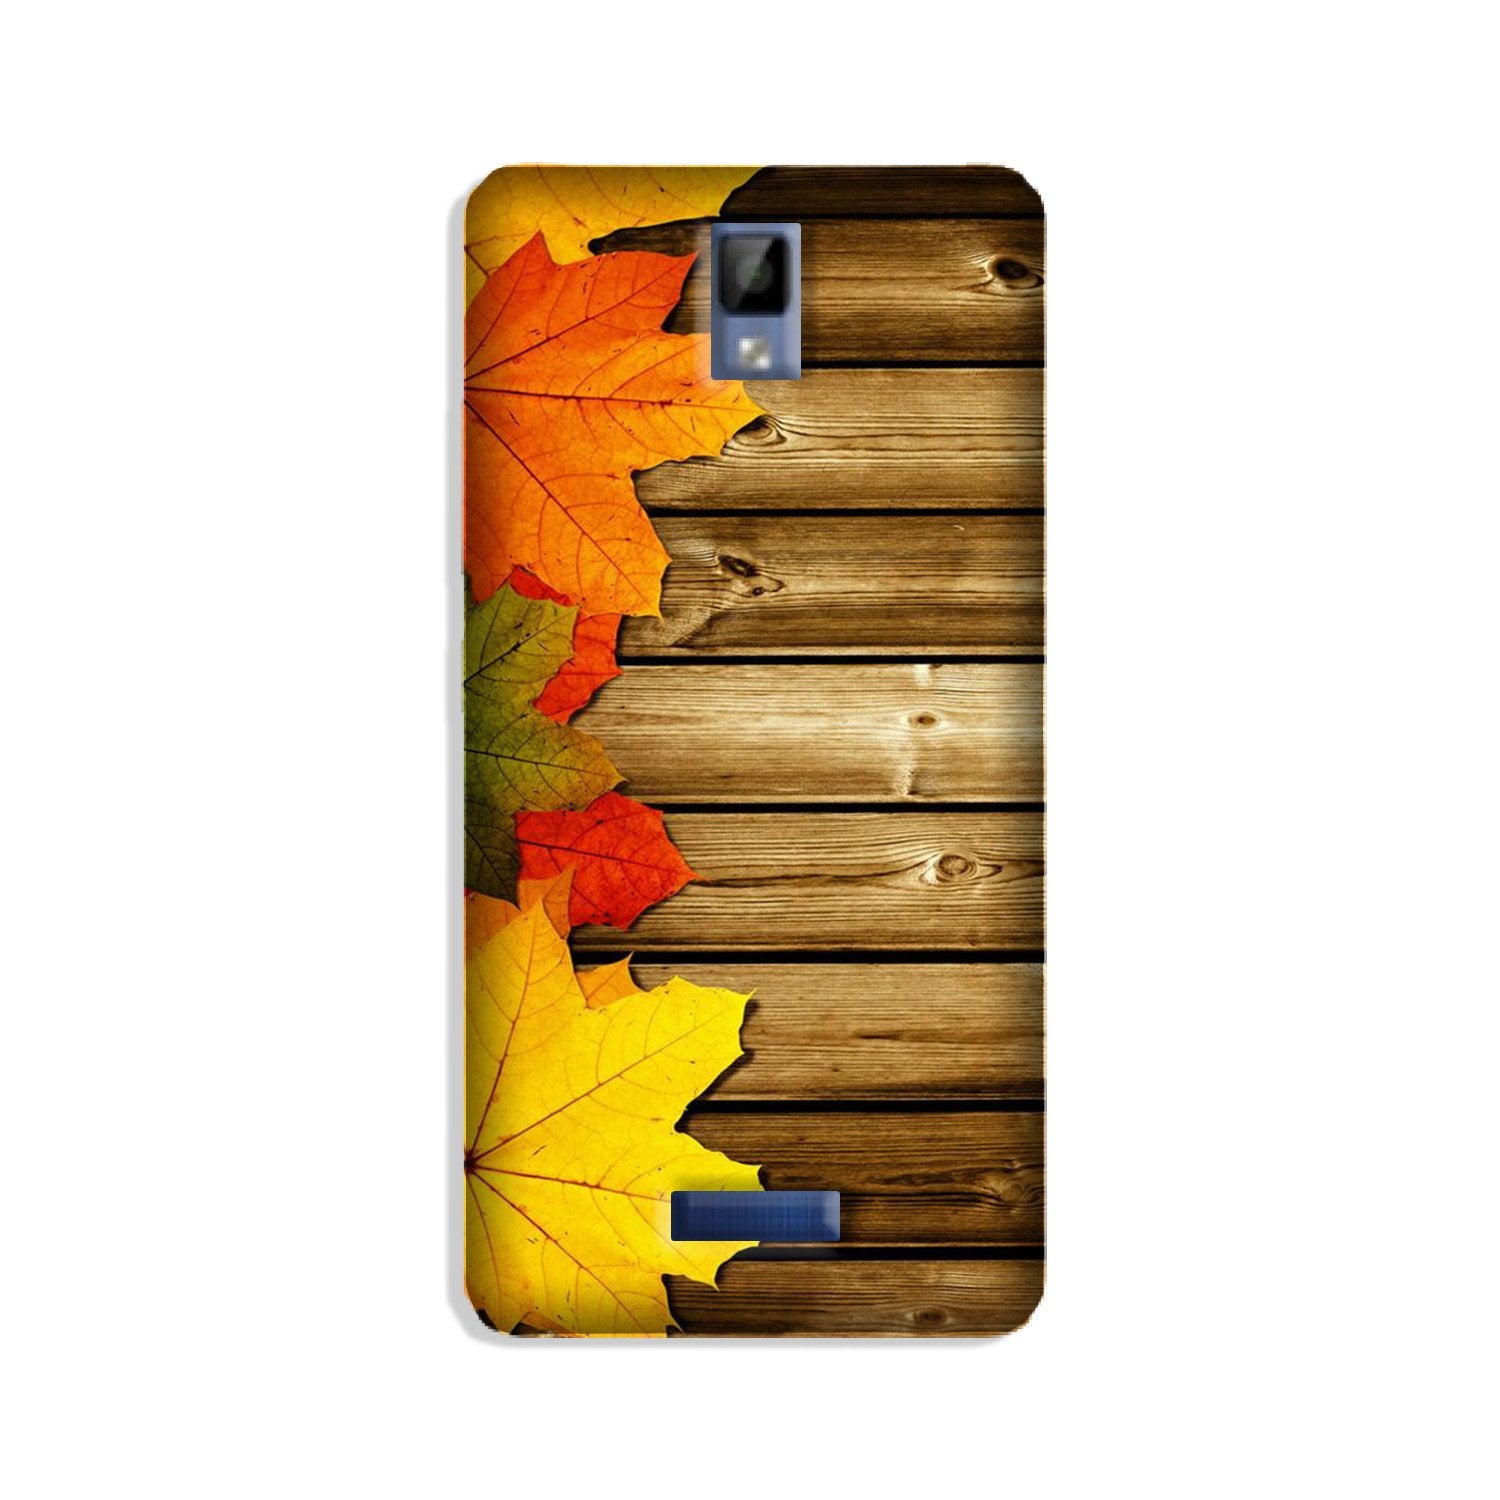 Wooden look3 Case for Gionee P7